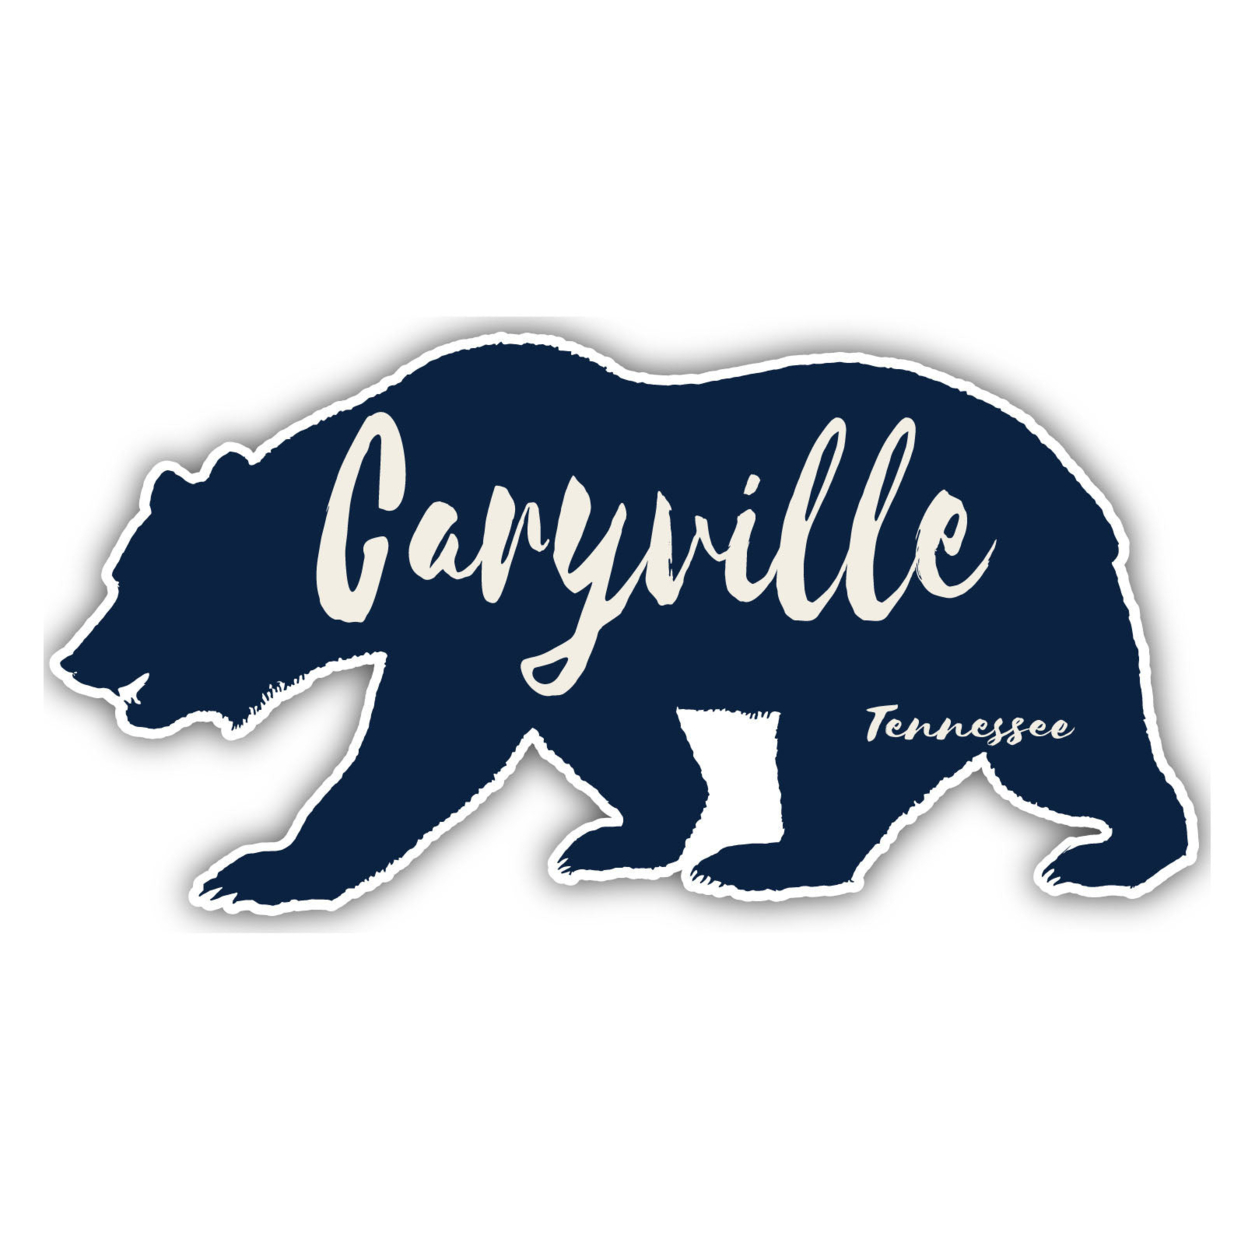 Caryville Tennessee Souvenir Decorative Stickers (Choose Theme And Size) - 4-Pack, 2-Inch, Tent